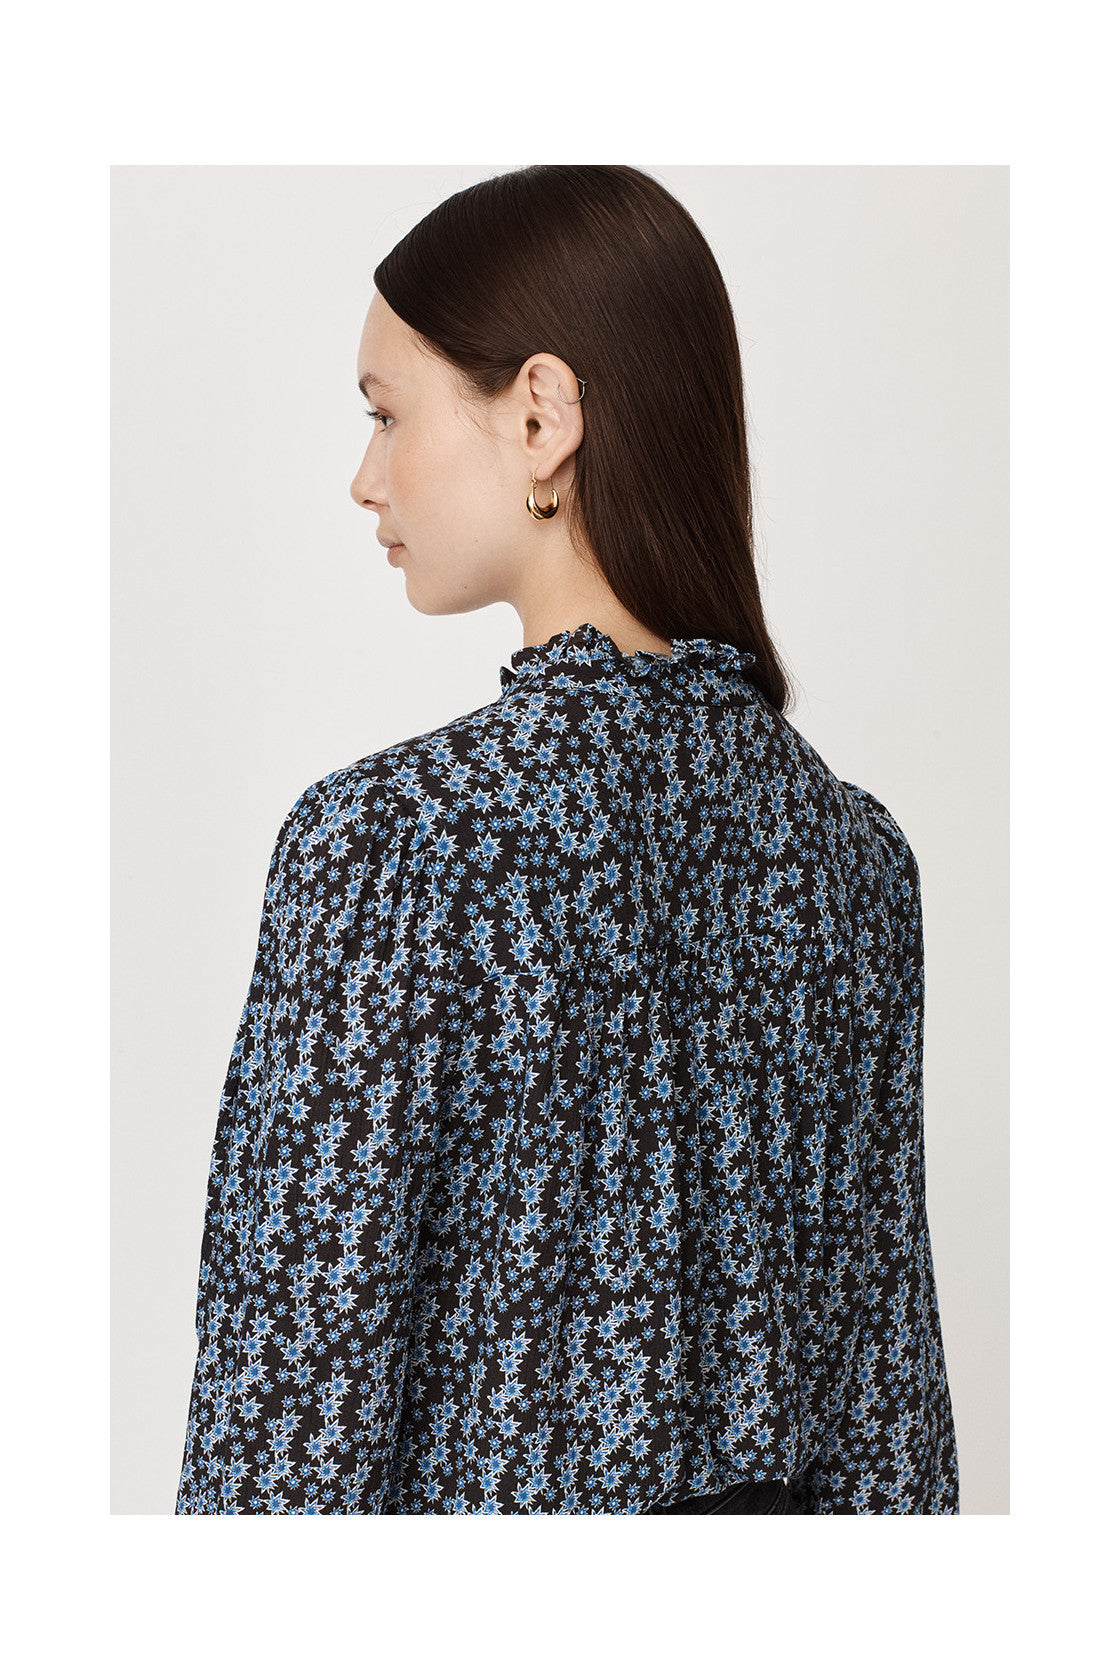 Ruffle collar three quarter length sleeves half placket with double ruffle blouse with black background and small blue and white star print